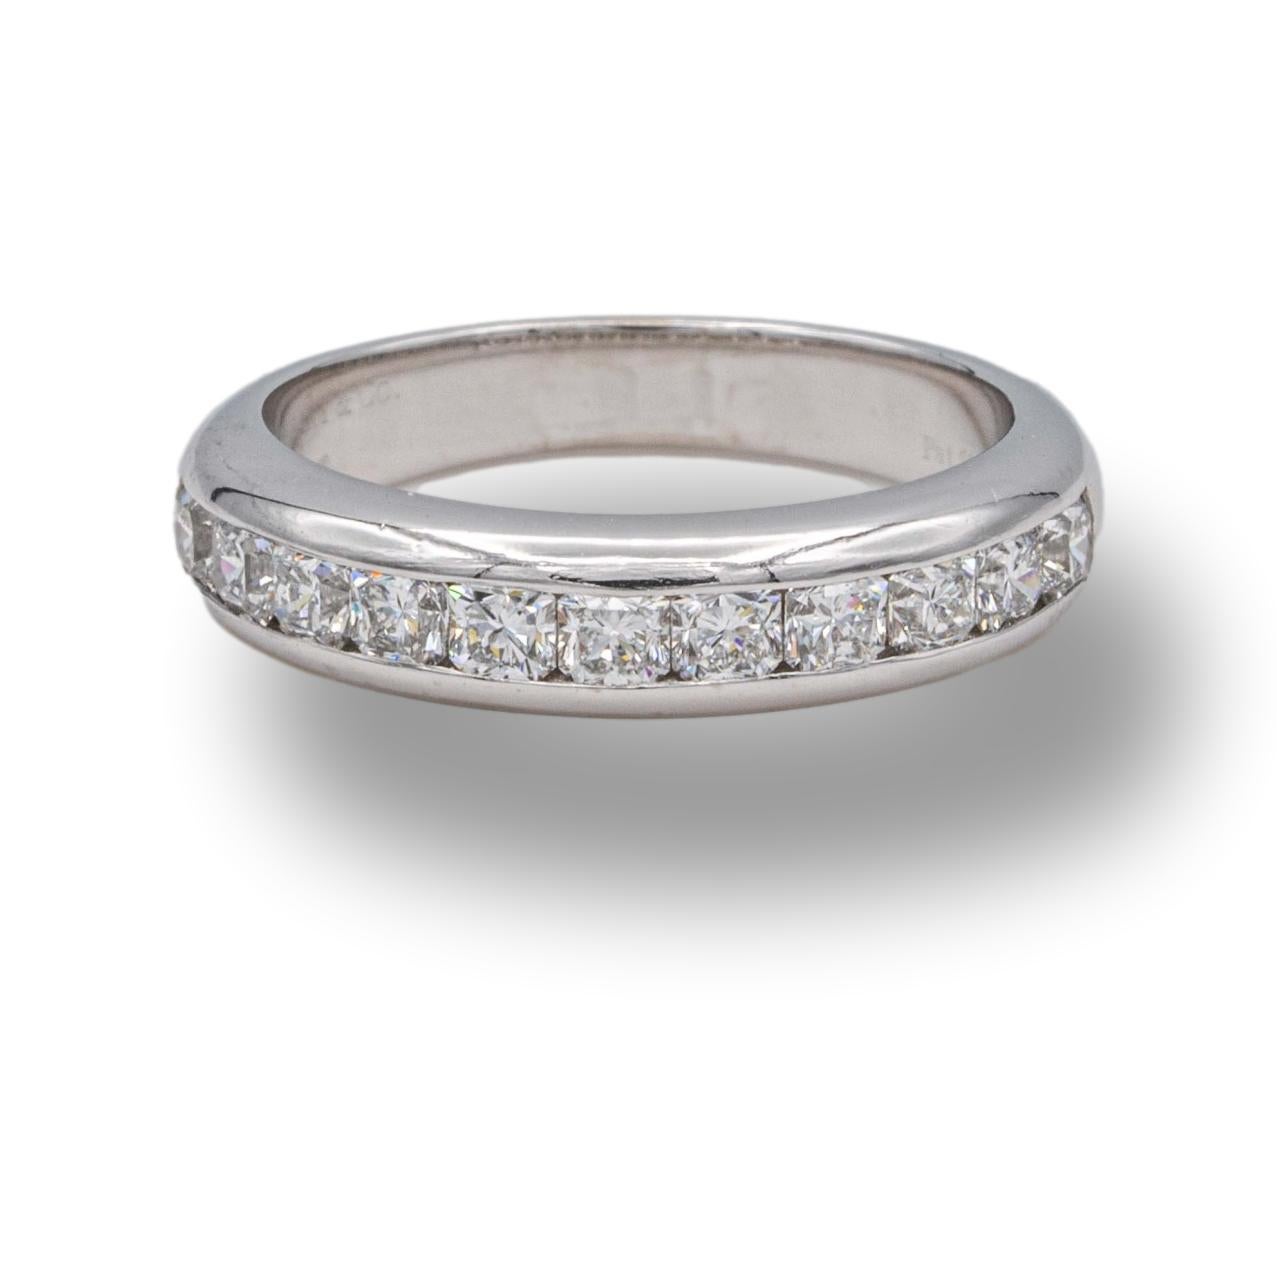 Tiffany & Co. Lucida cut diamond wedding/Anniversary band ring finely crafted in platinum channel set featuring 11 lucida cut diamonds weighing  approximately 0.70 carats in fine quality ranging F-G color, VVS-VS clarity. The band measures